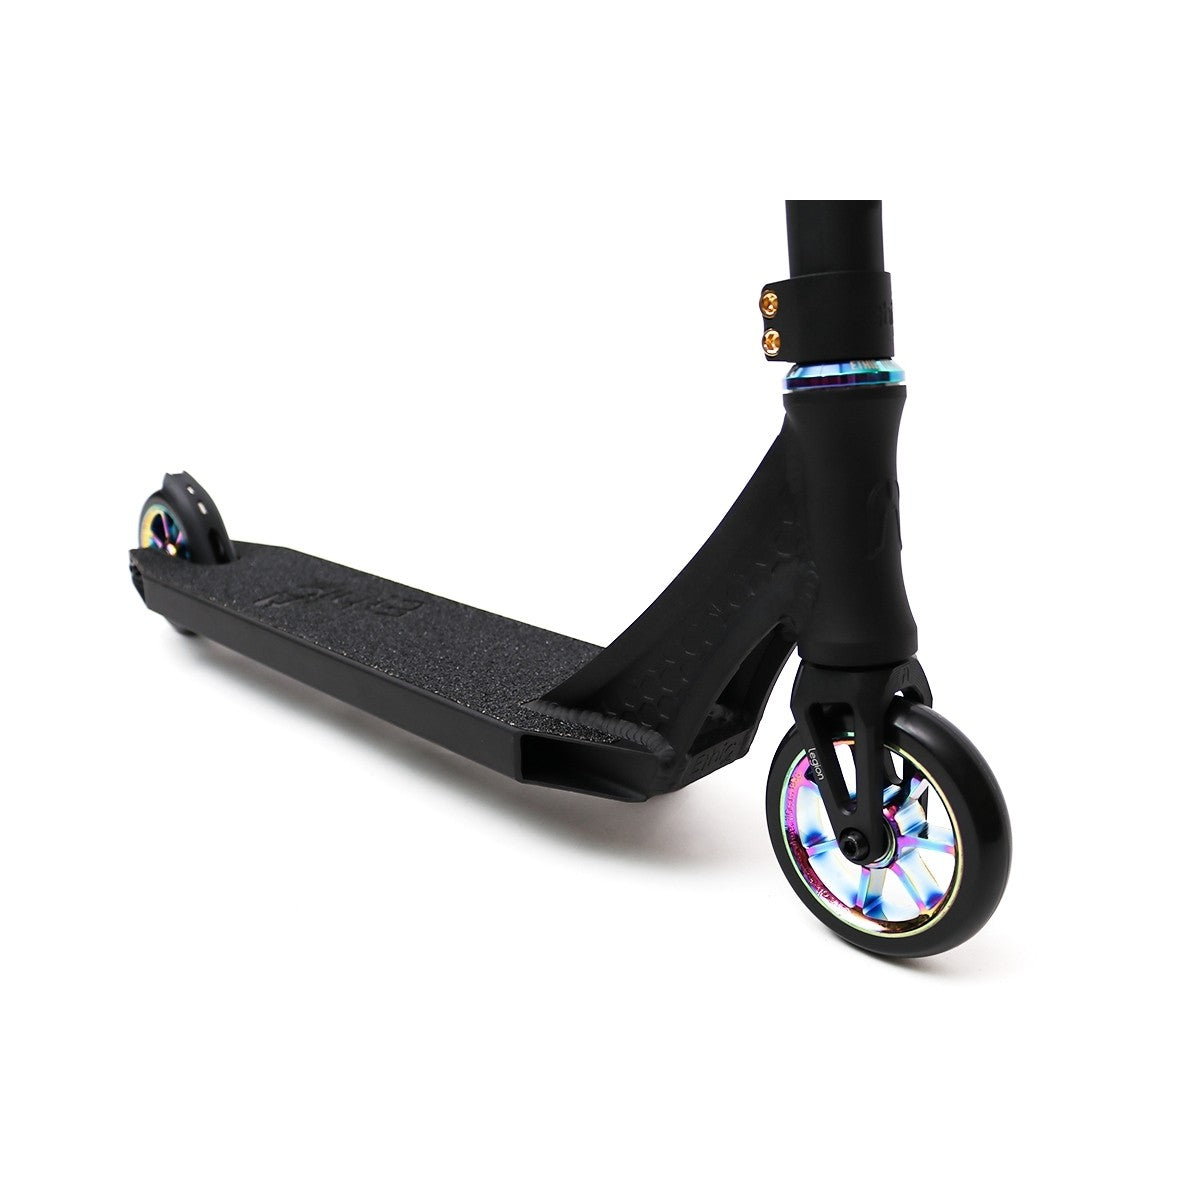 Ethic Dtc - Erawan Complete Scooter - Neo Chrome